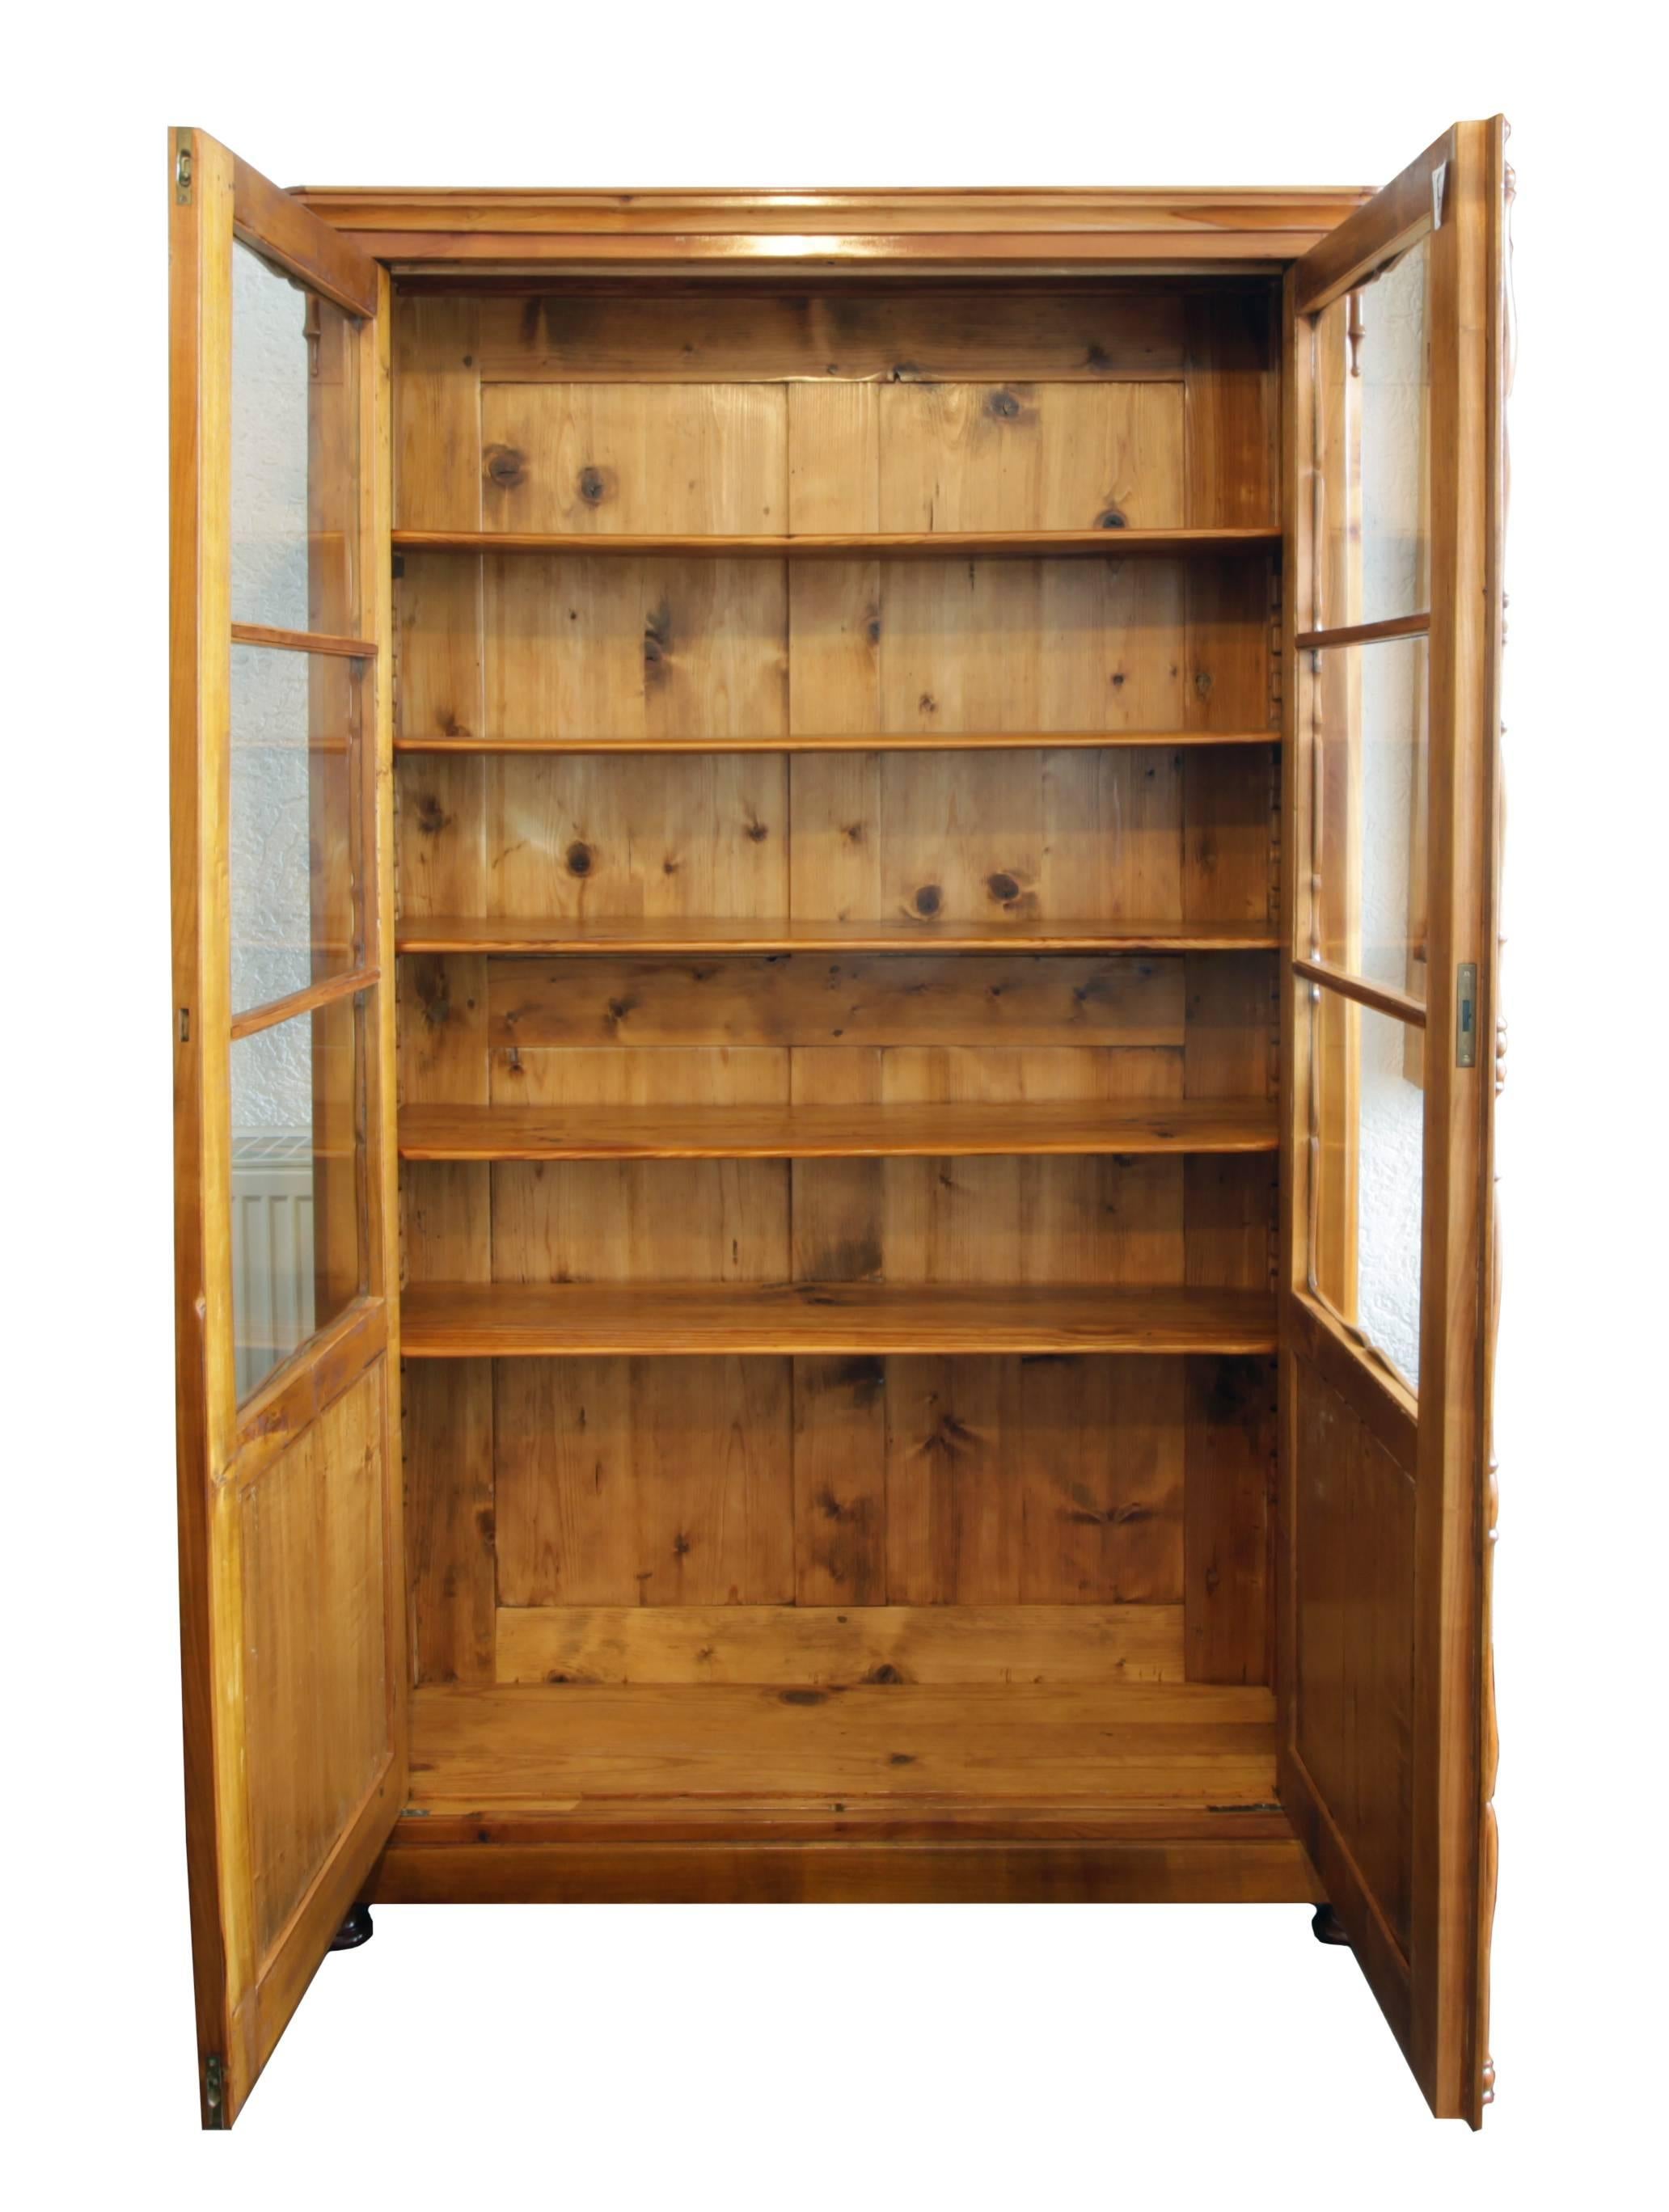 Beautiful bookcase made of solid cherrywood, interior trim and back wall made of pine wood. The cabinet dates from the late Biedermeier period / Louis Philippe. The cabinet is in very good restored condition.